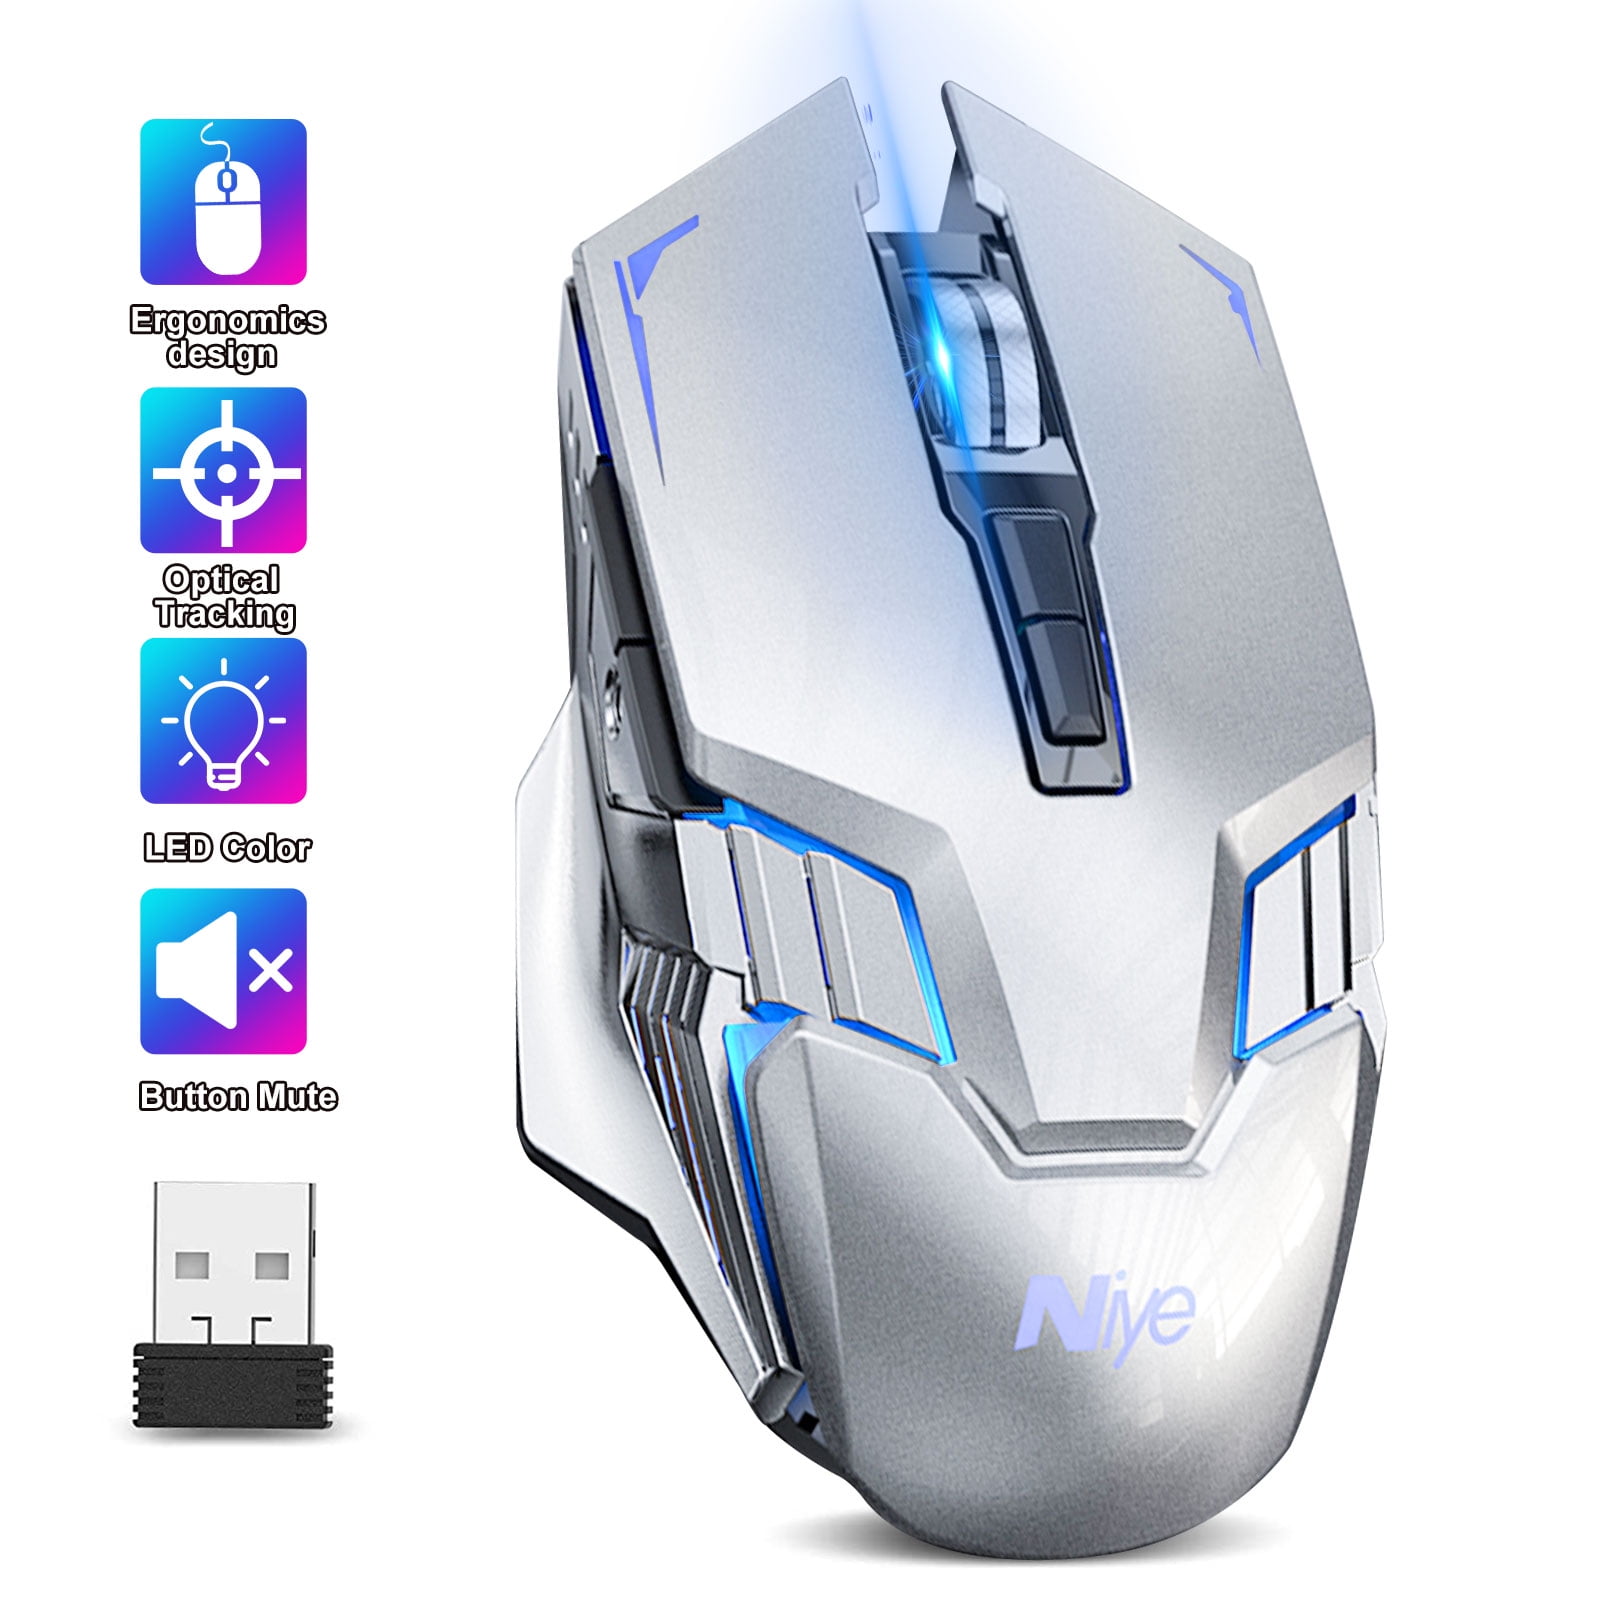 6 Programmable Buttons Gaming Mouse Wired Gaming Mouse USB Optical Computer Mice with RGB Backlit 6400 dpi Optical Sensor Ergonomic Gaming Mice for PC Laptop Windows Mac